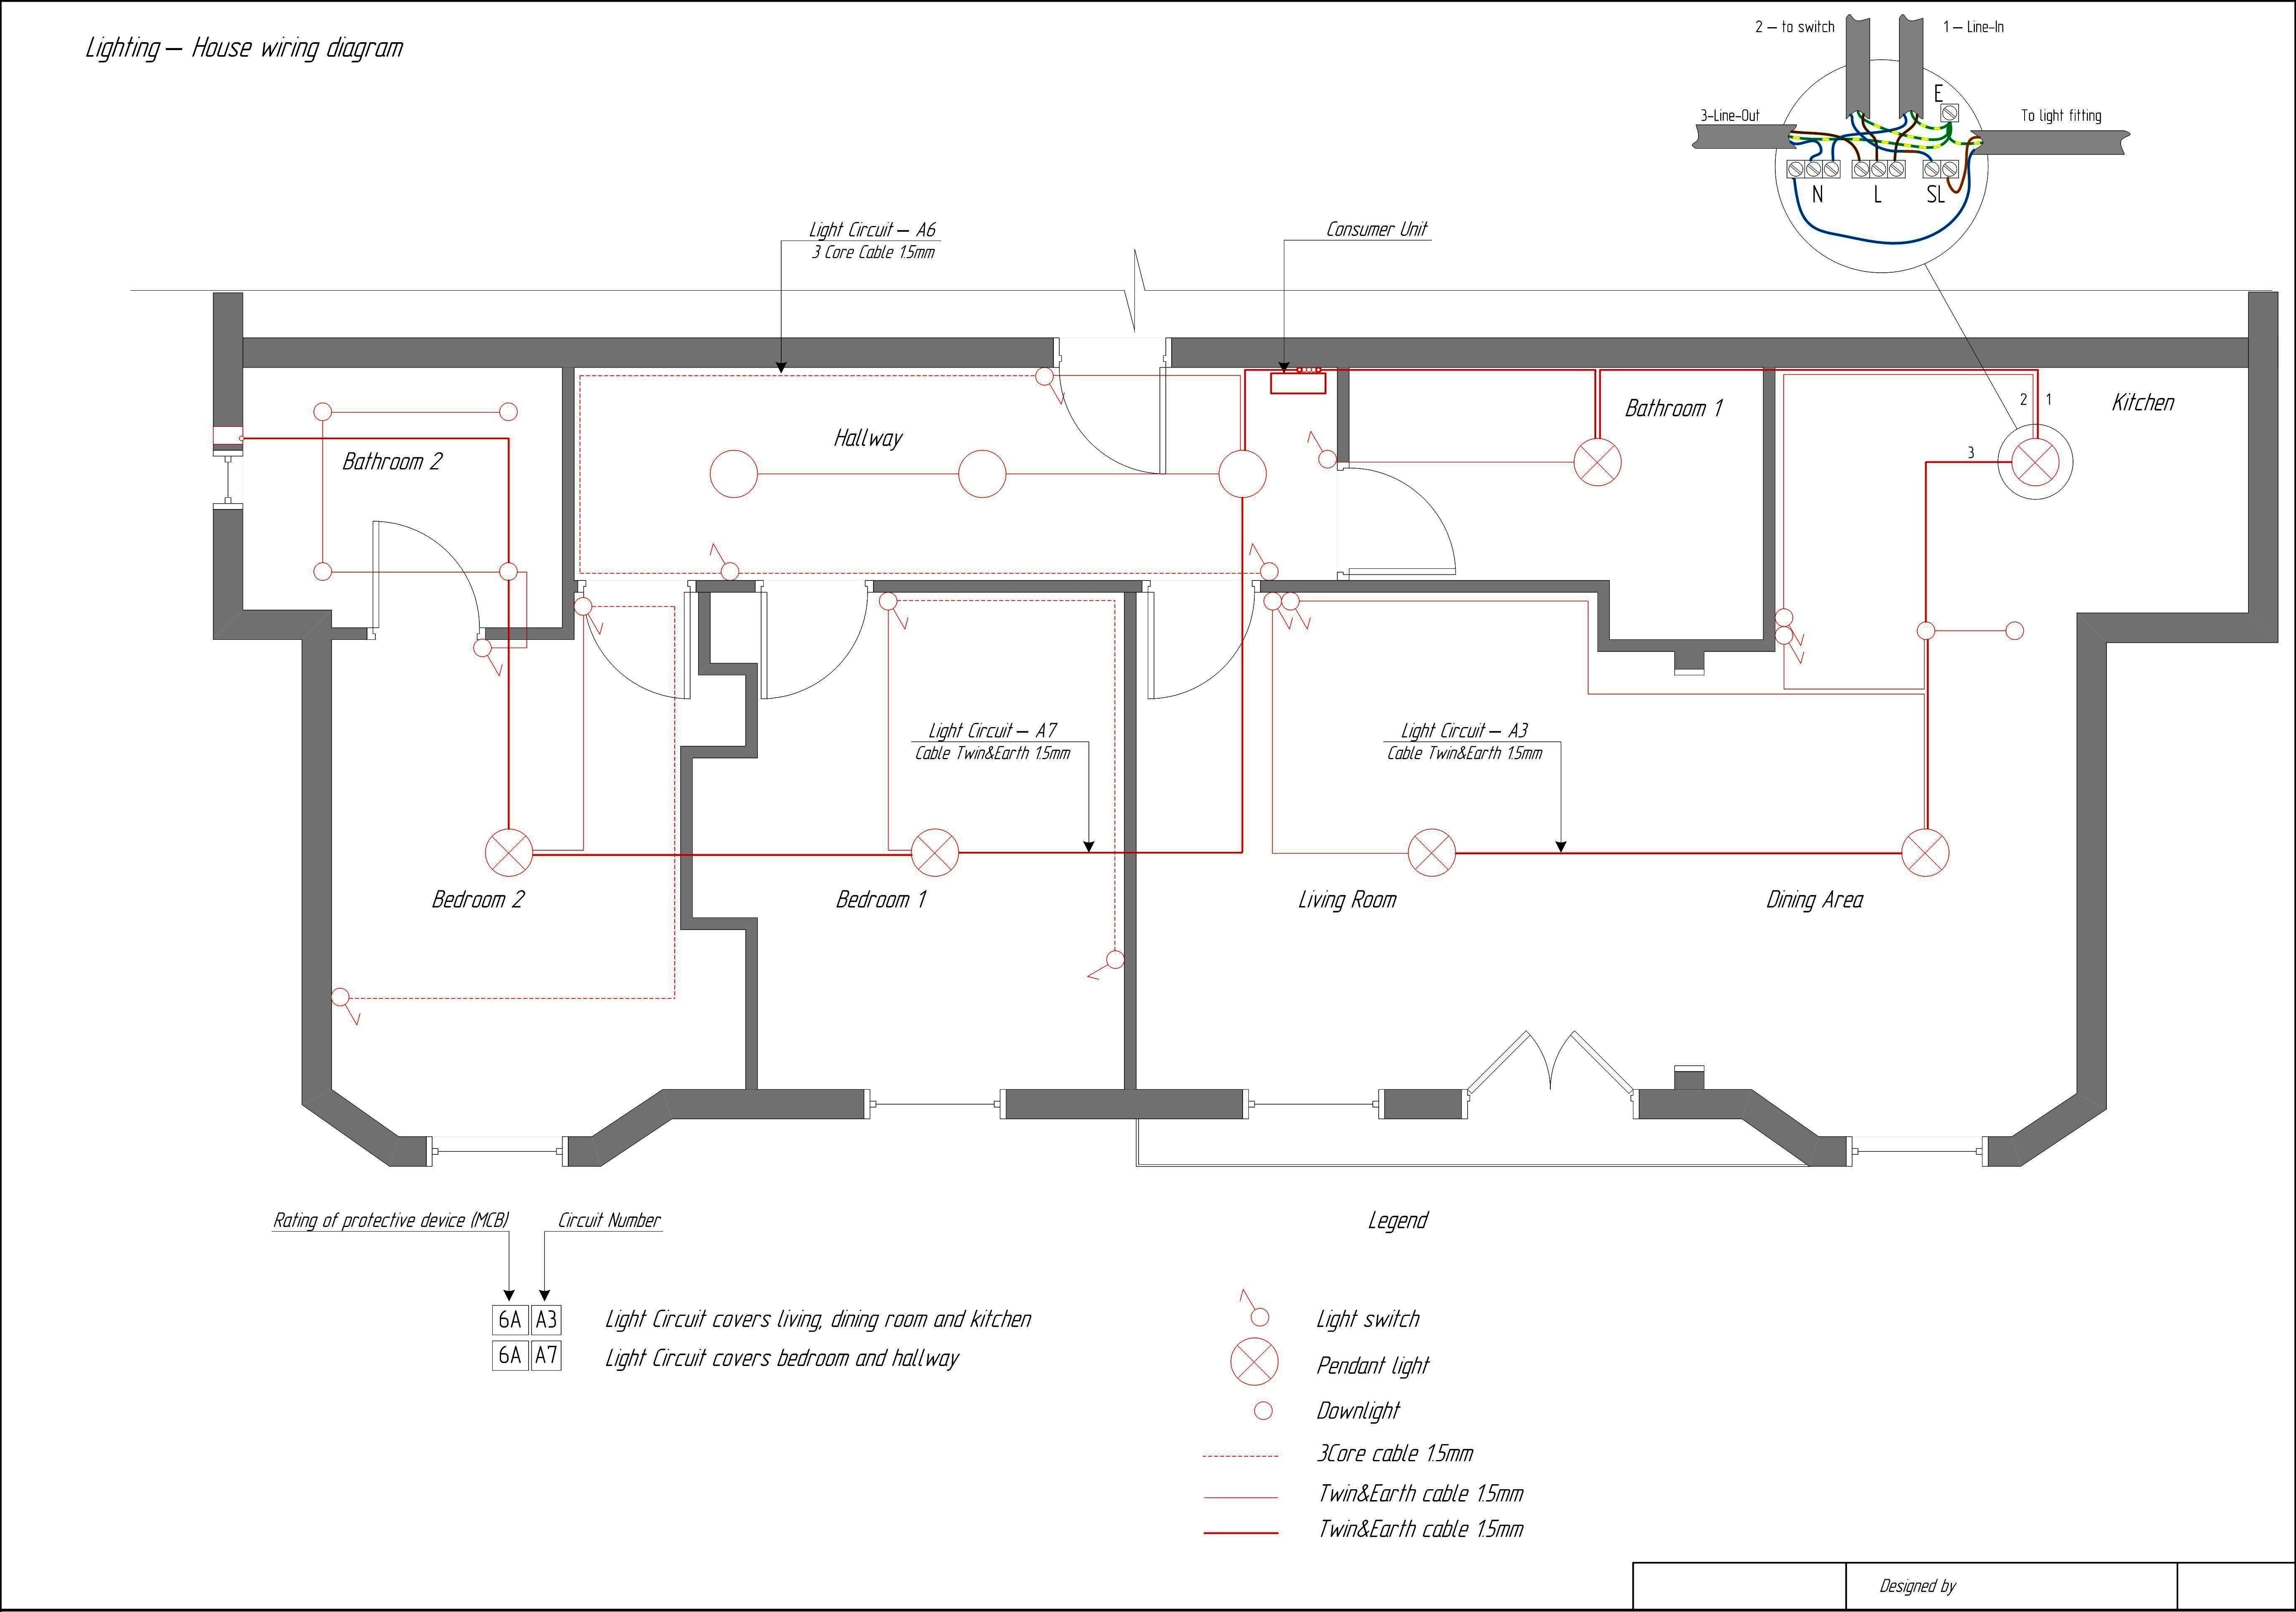 Electricity Diagram Inspirational House Wiring Diagram Electrical Floor Plan 2004 2010 Bmw X3 E83 3 0d